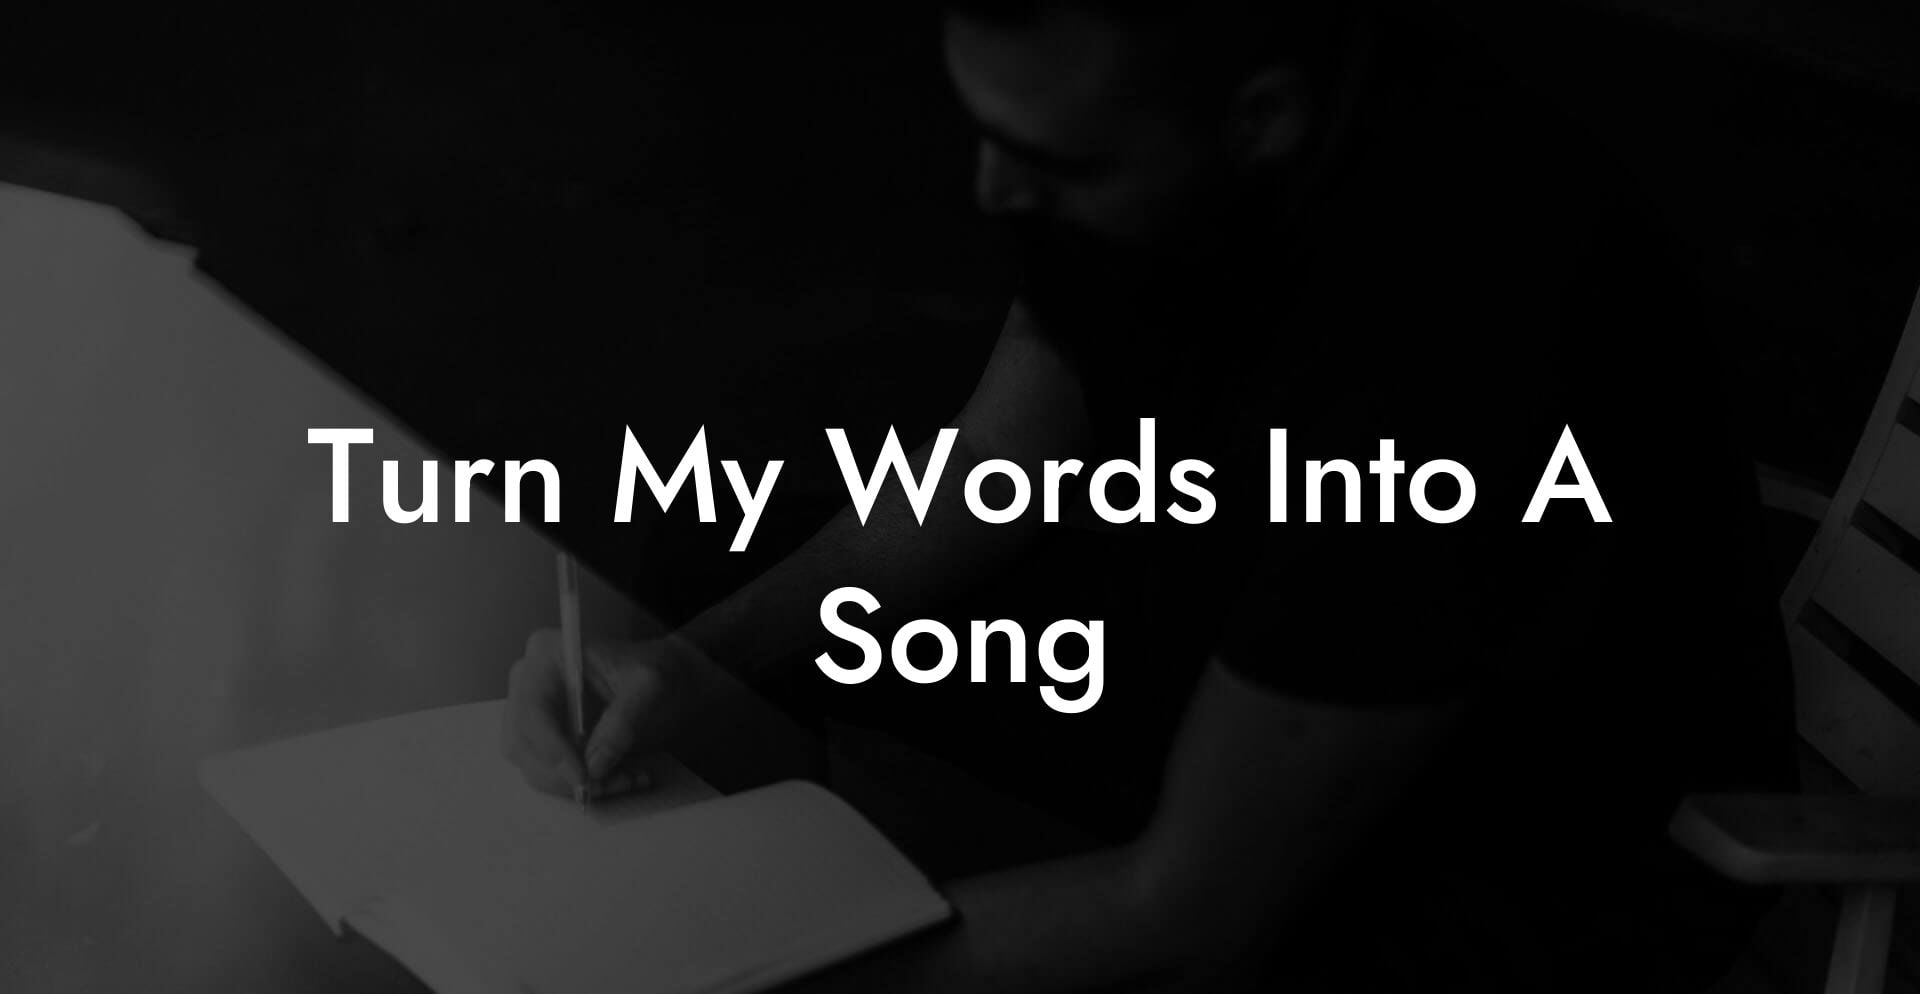 turn my words into a song lyric assistant